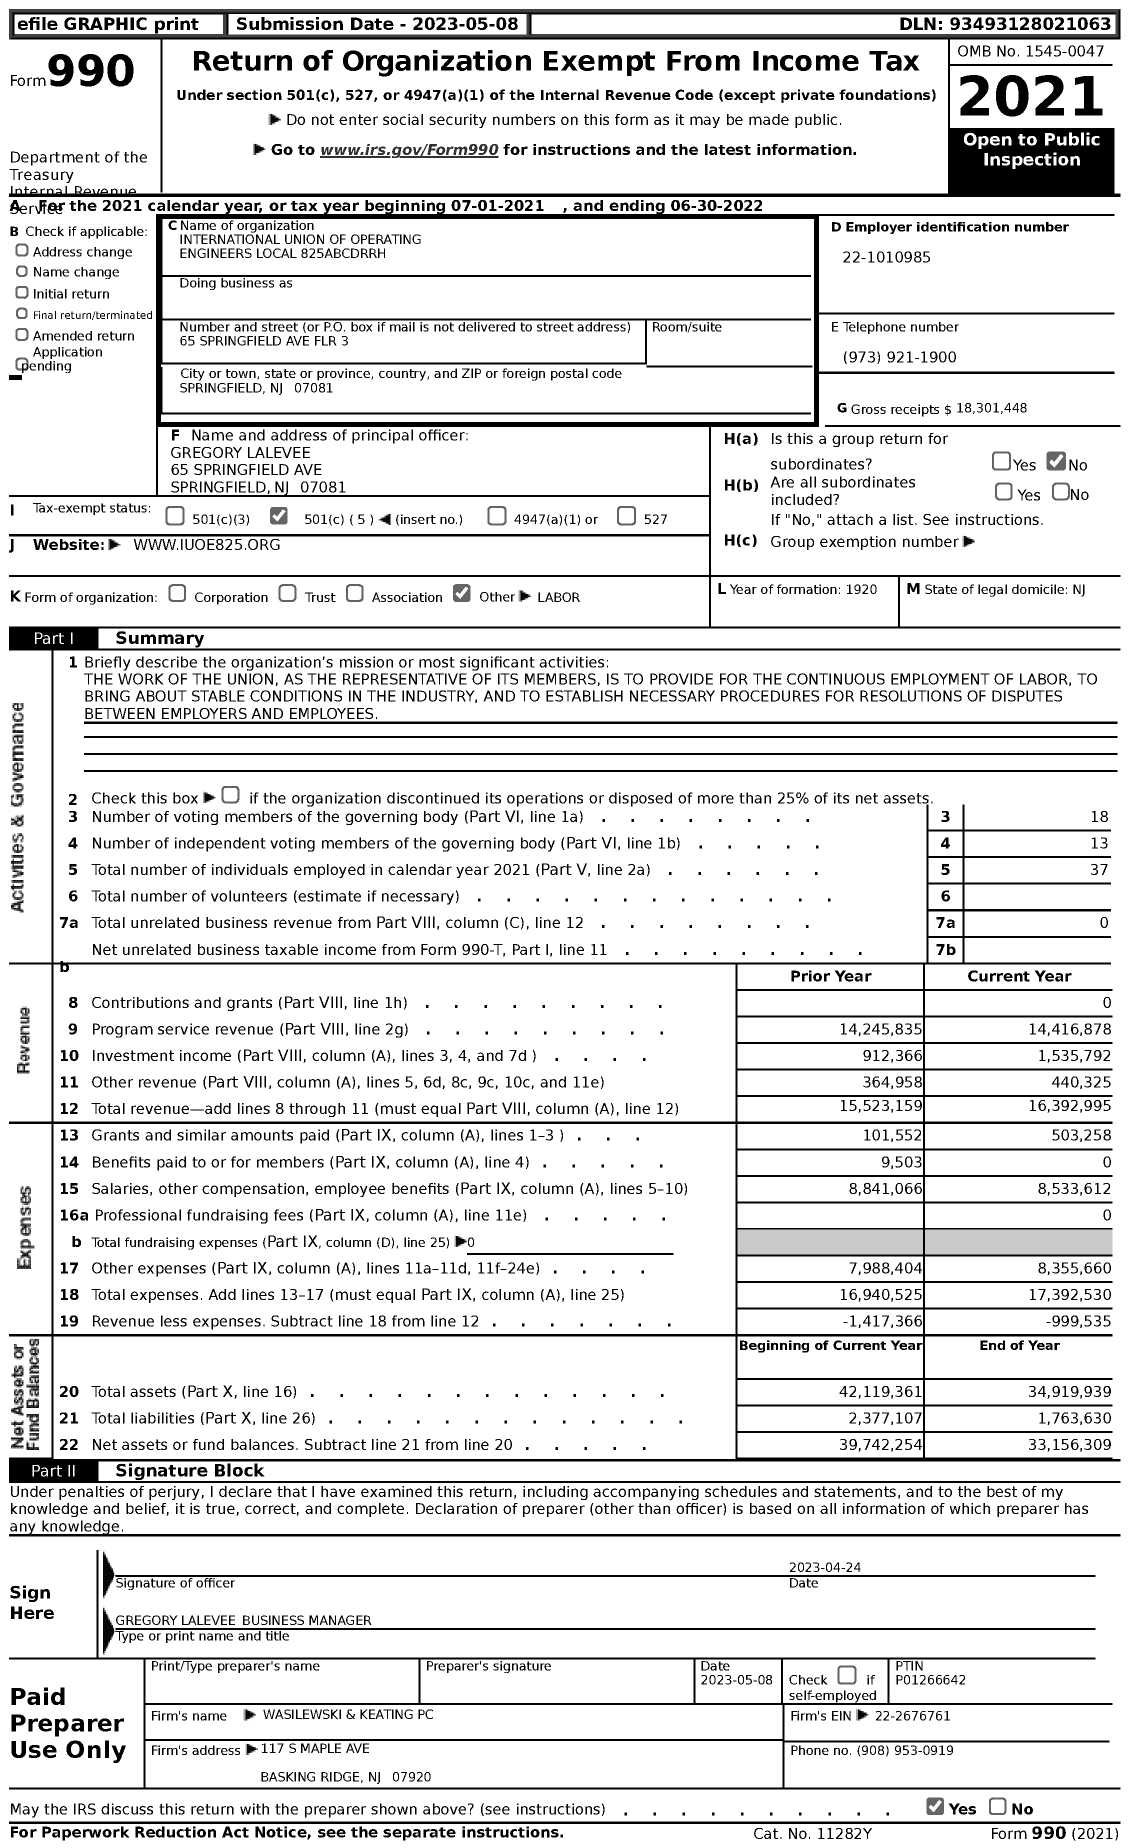 Image of first page of 2021 Form 990 for International Union of Operating Engineers Local 825abcdrrh (IUOE825)